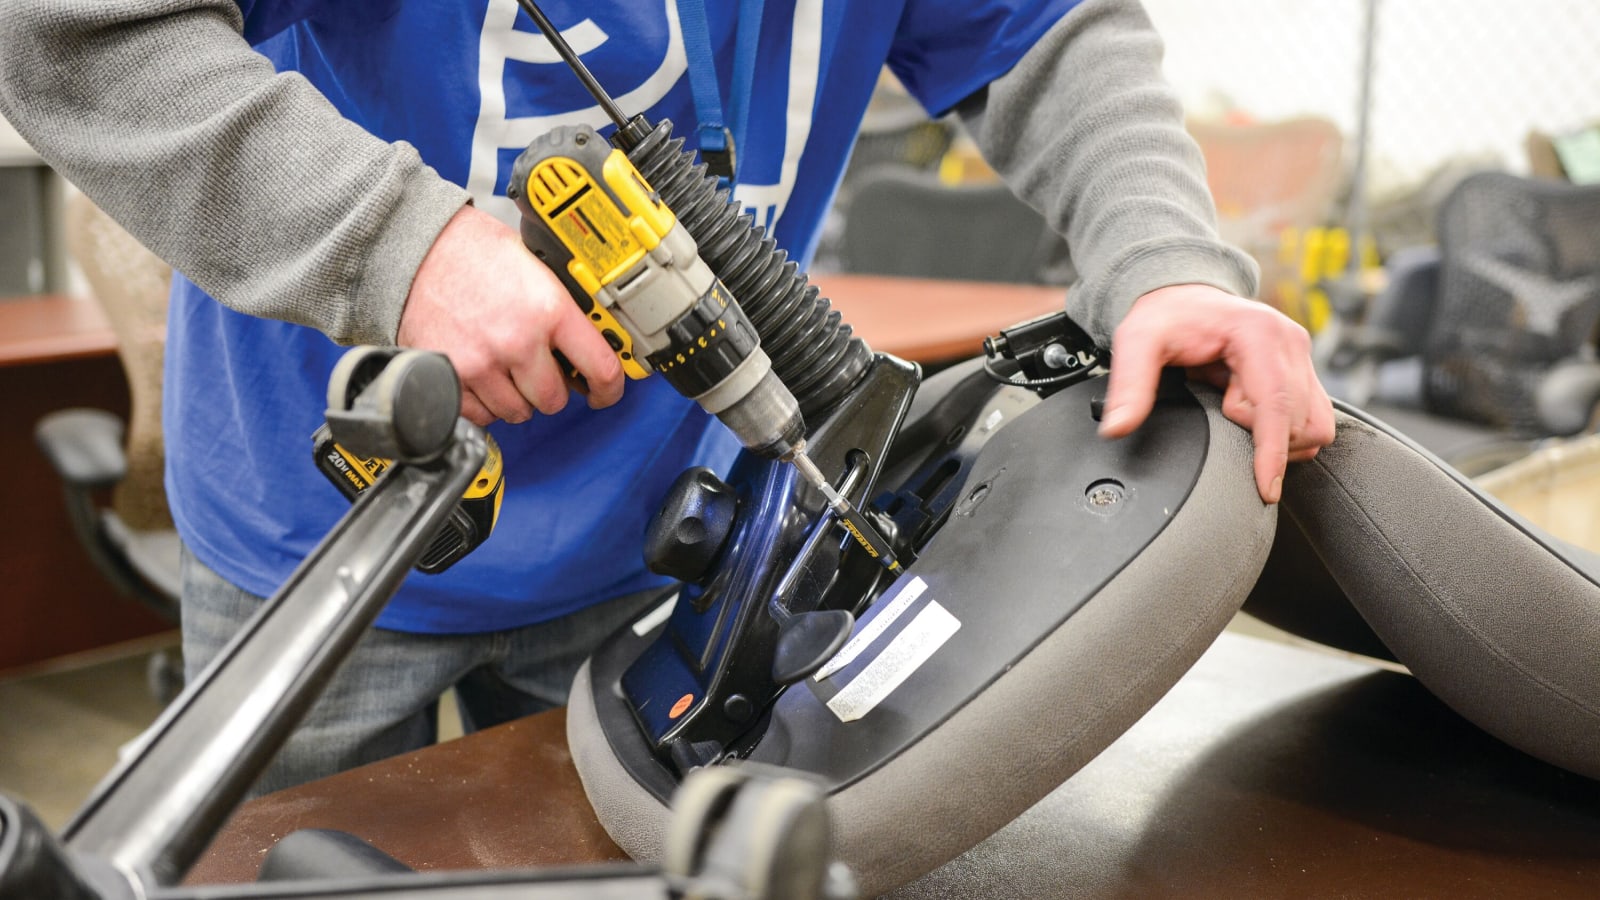 A close up view of a person holding the bottom, underside, section of an office chair and using a drill to secure parts during assembly. 